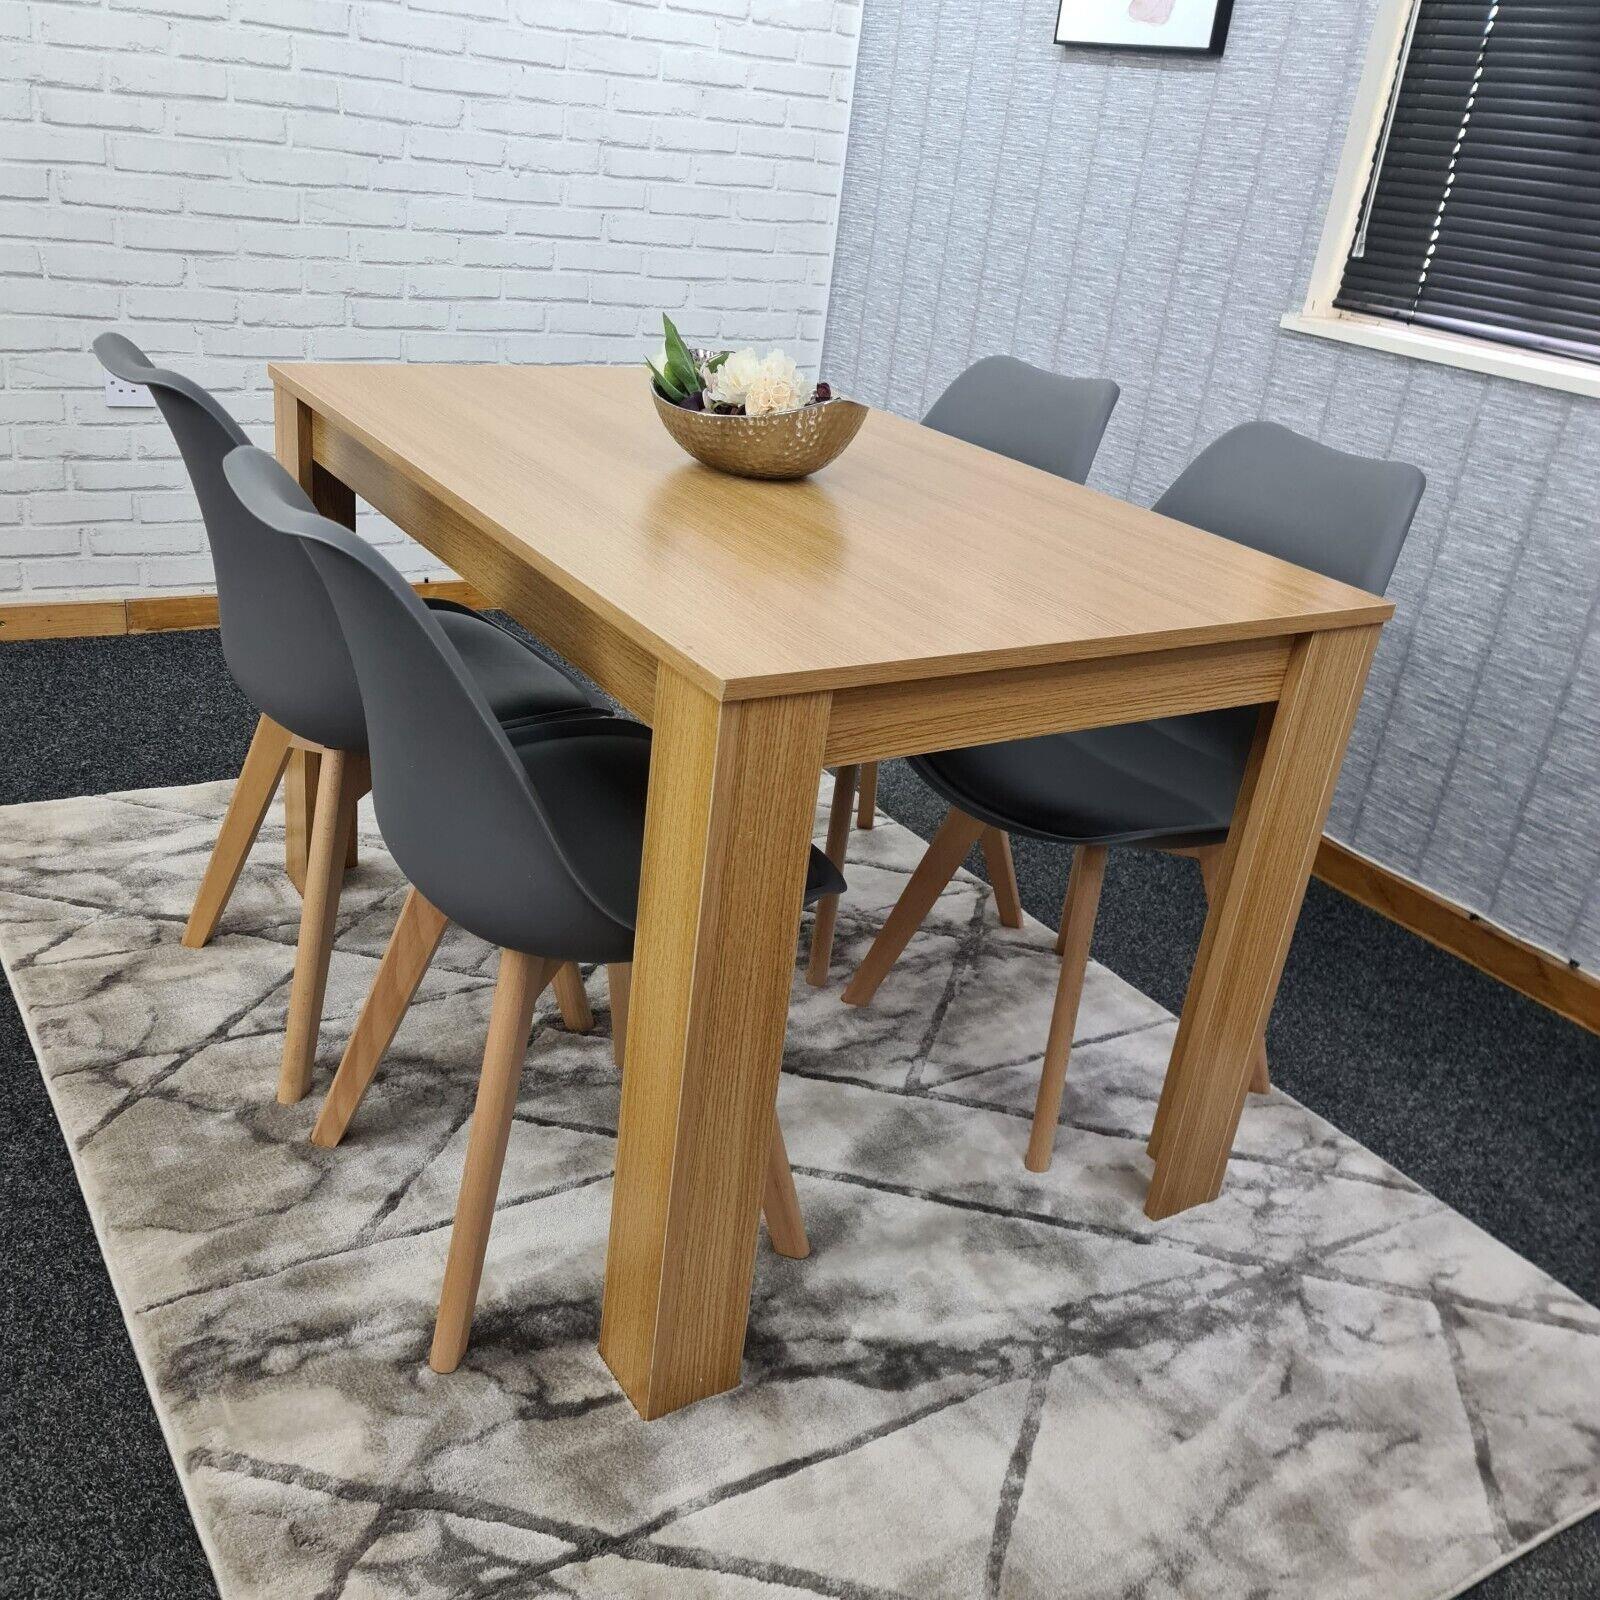 Kitchen Oak Dining Table With 4 Chairs Dining Room Furniture